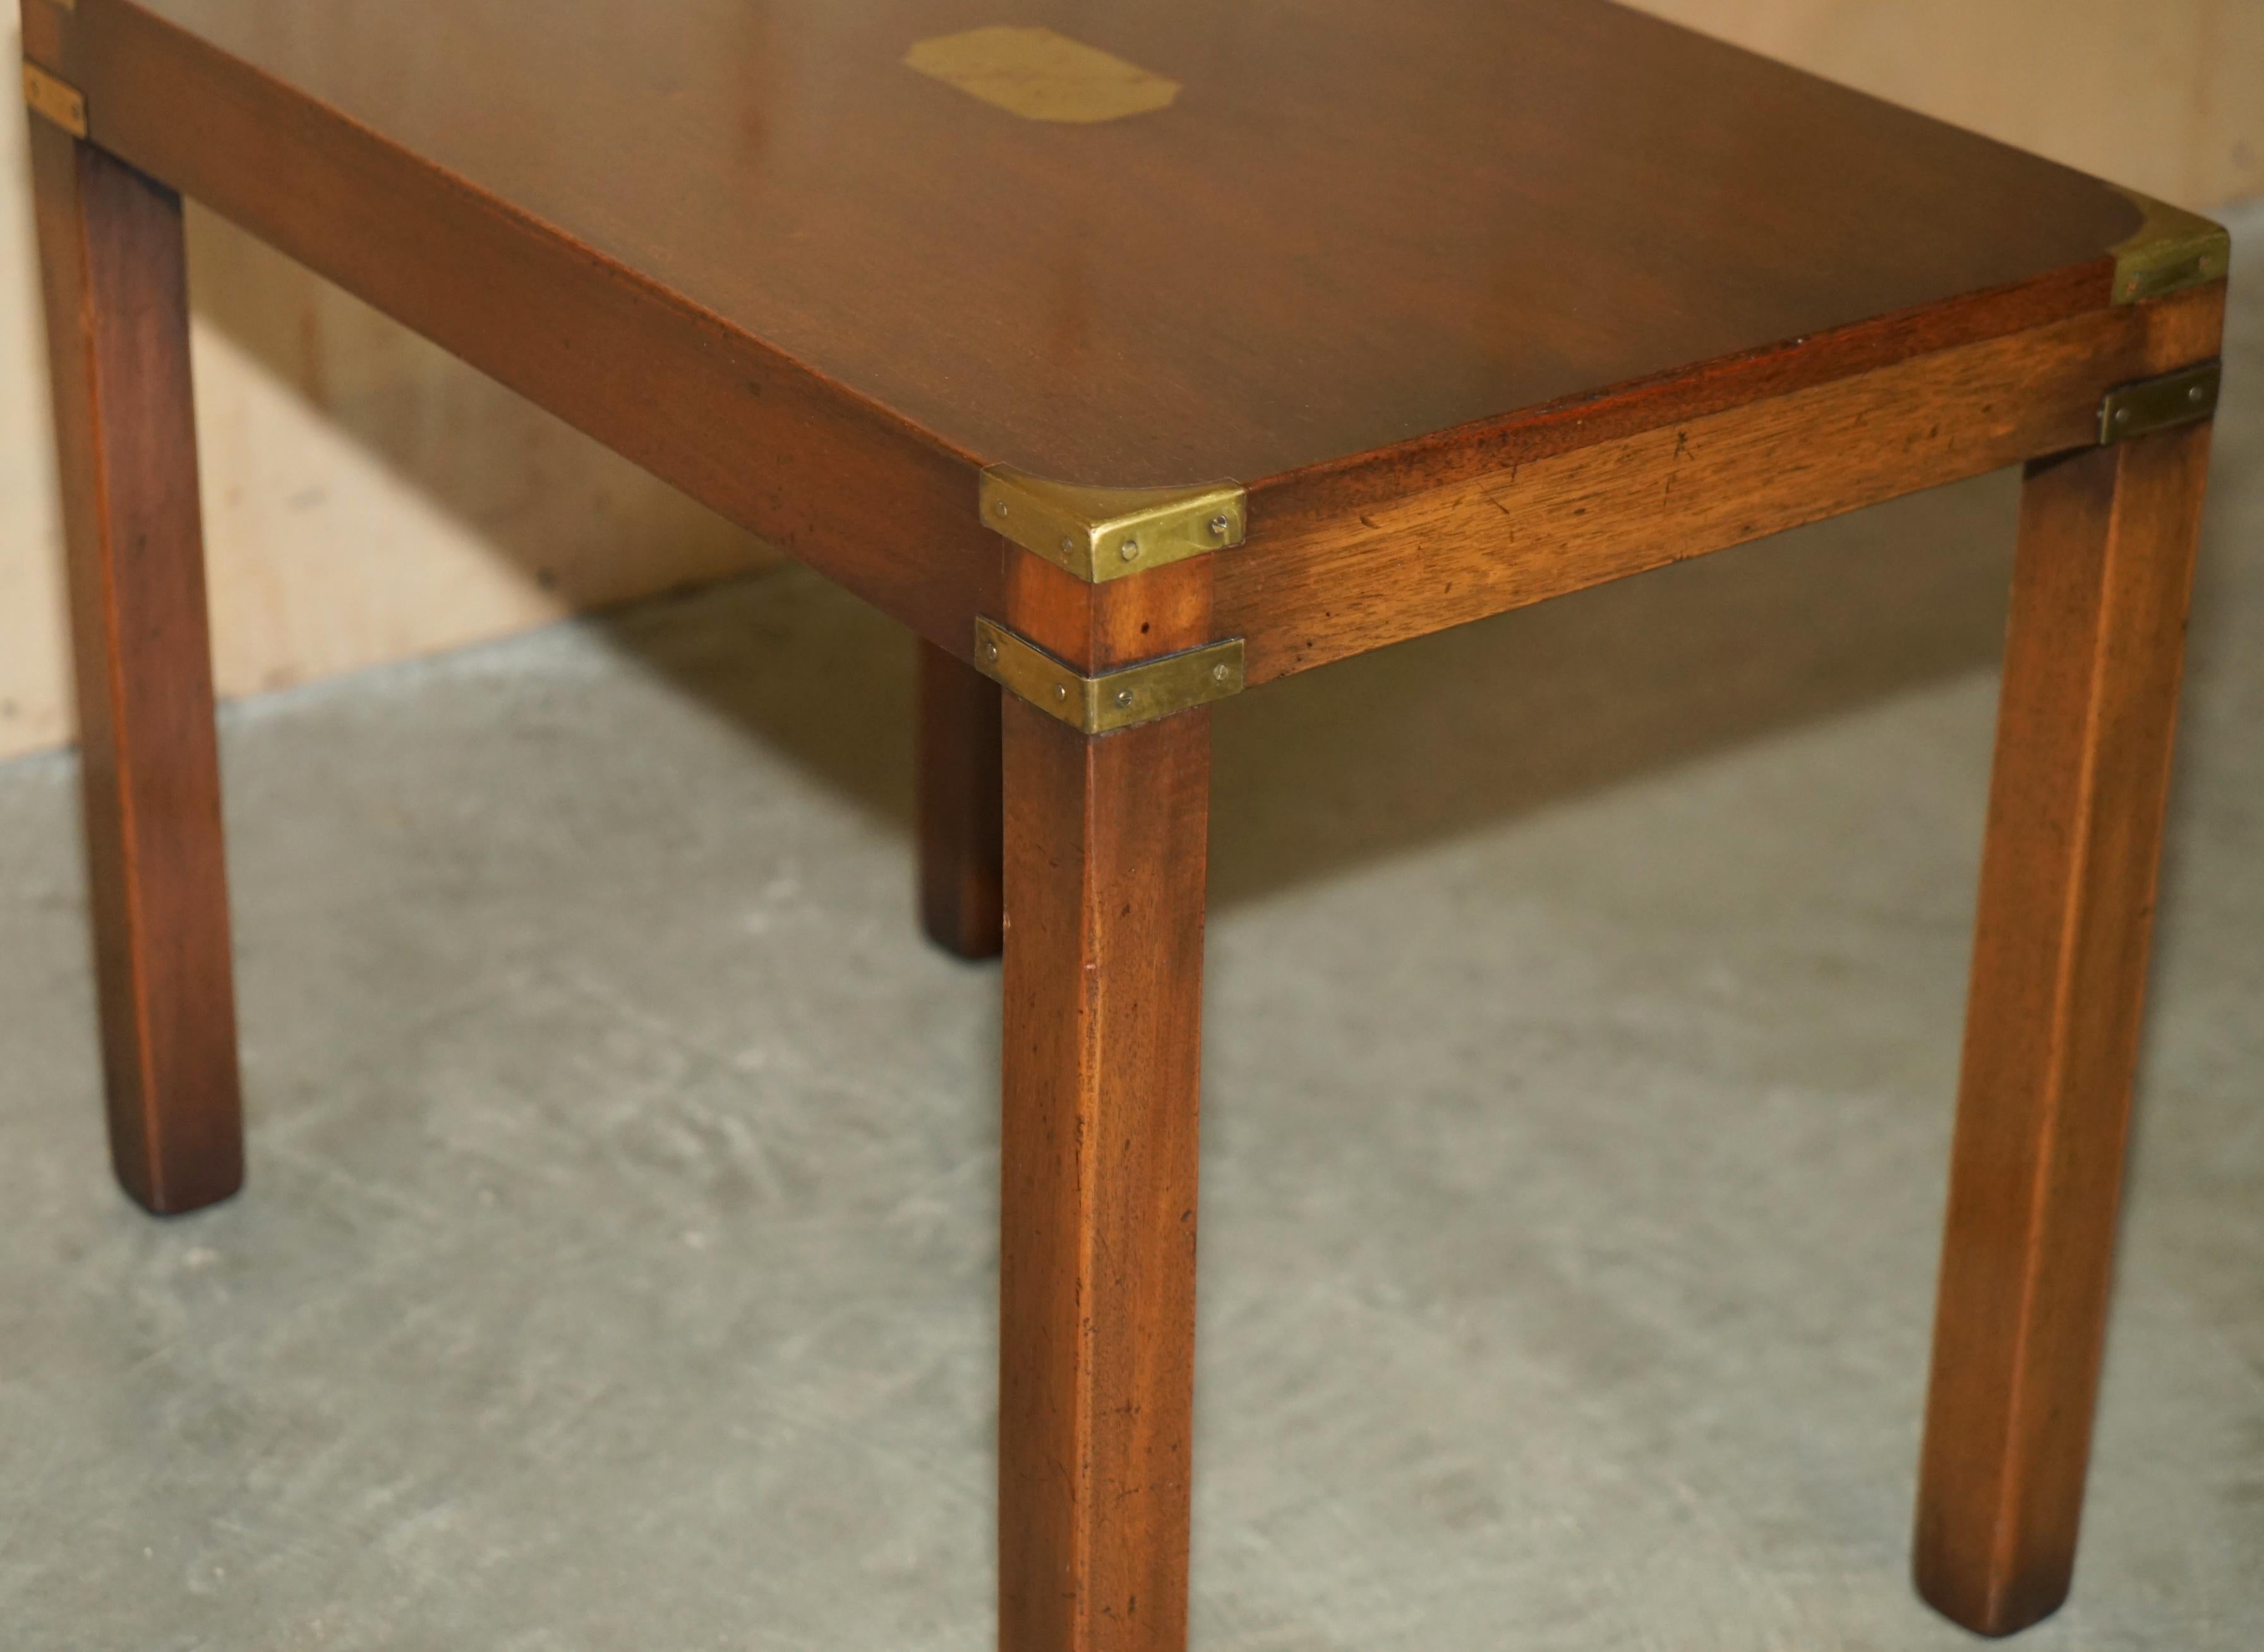 RESTORED HARRODS KENNEDY COFFEE & SiDE TABLE NEST OF TABLES MILITARY CAMPAIGN im Angebot 5